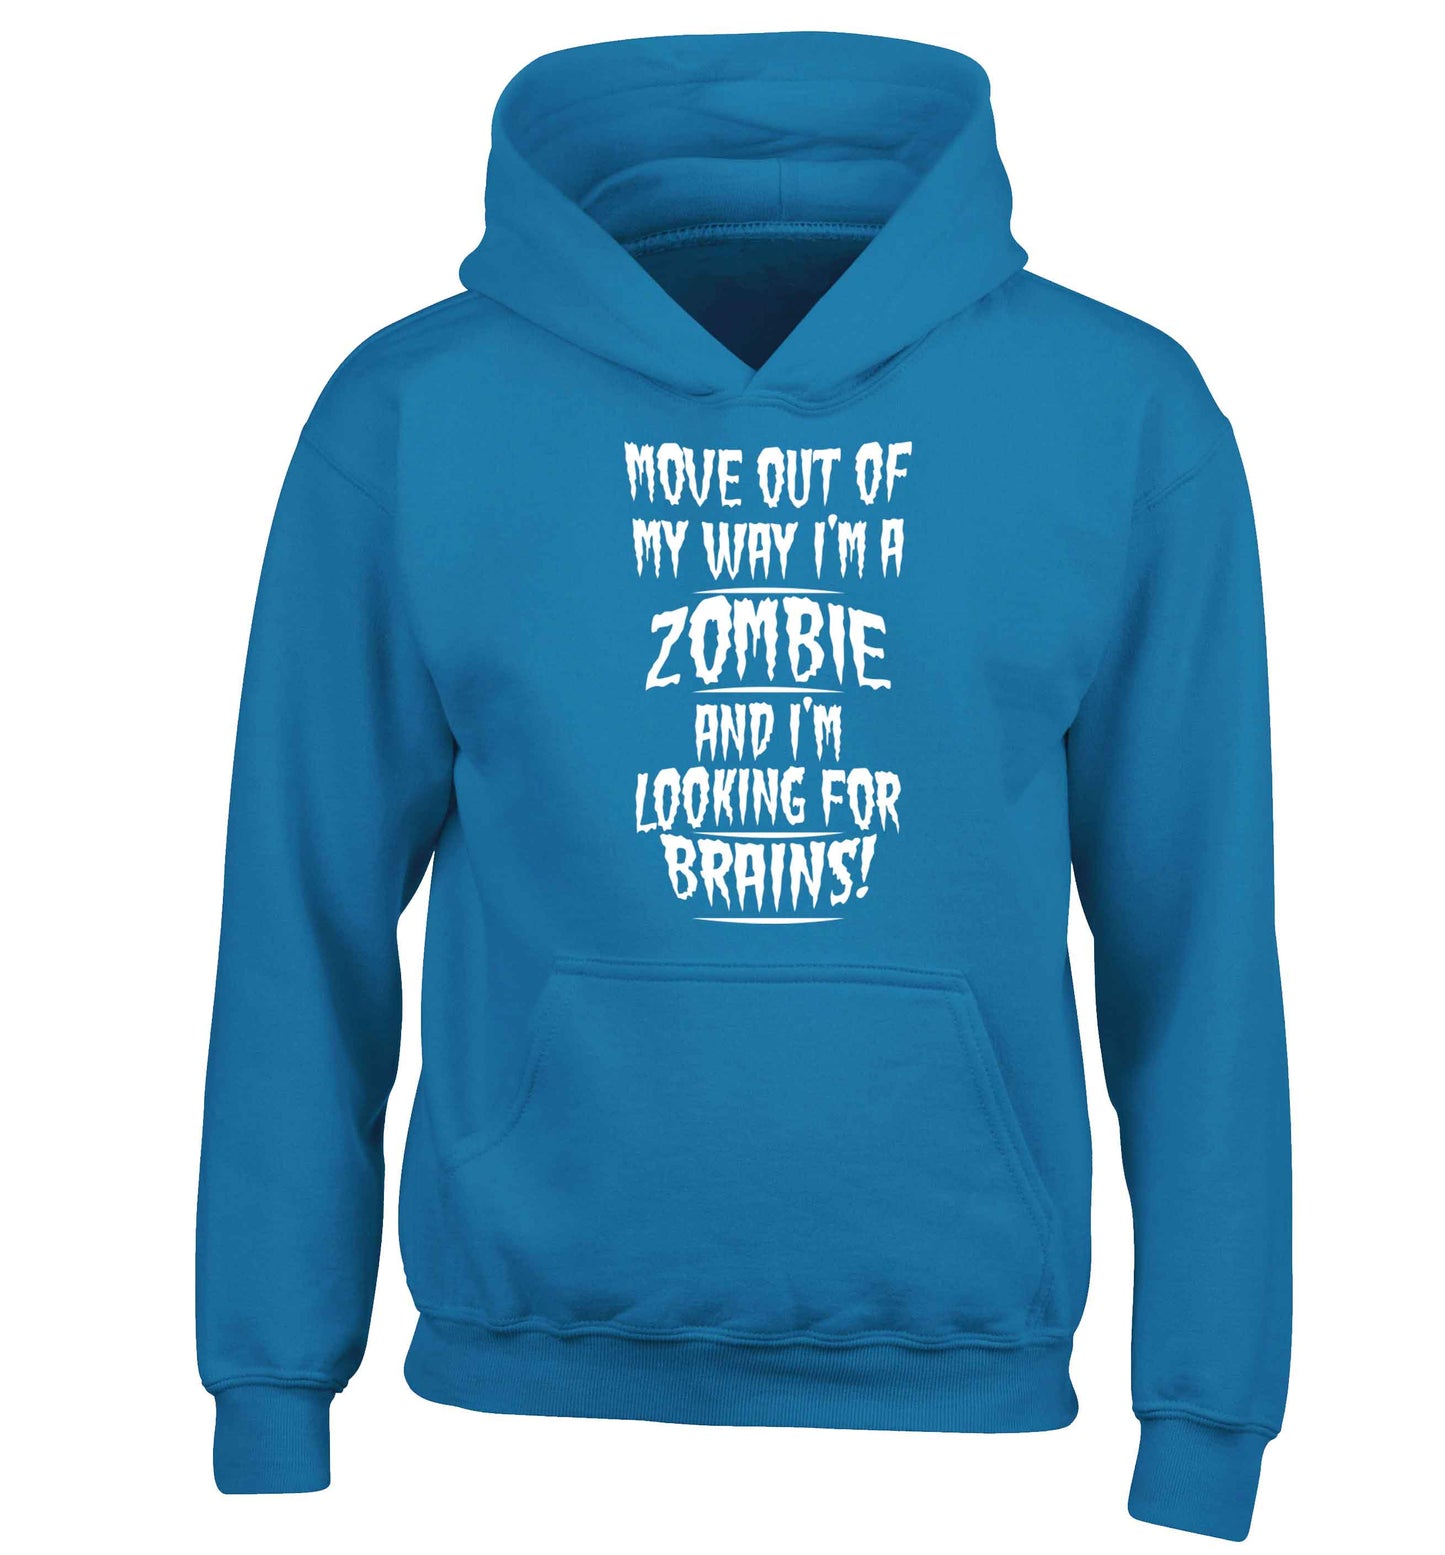 I'm a zombie and I'm looking for brains! children's blue hoodie 12-13 Years